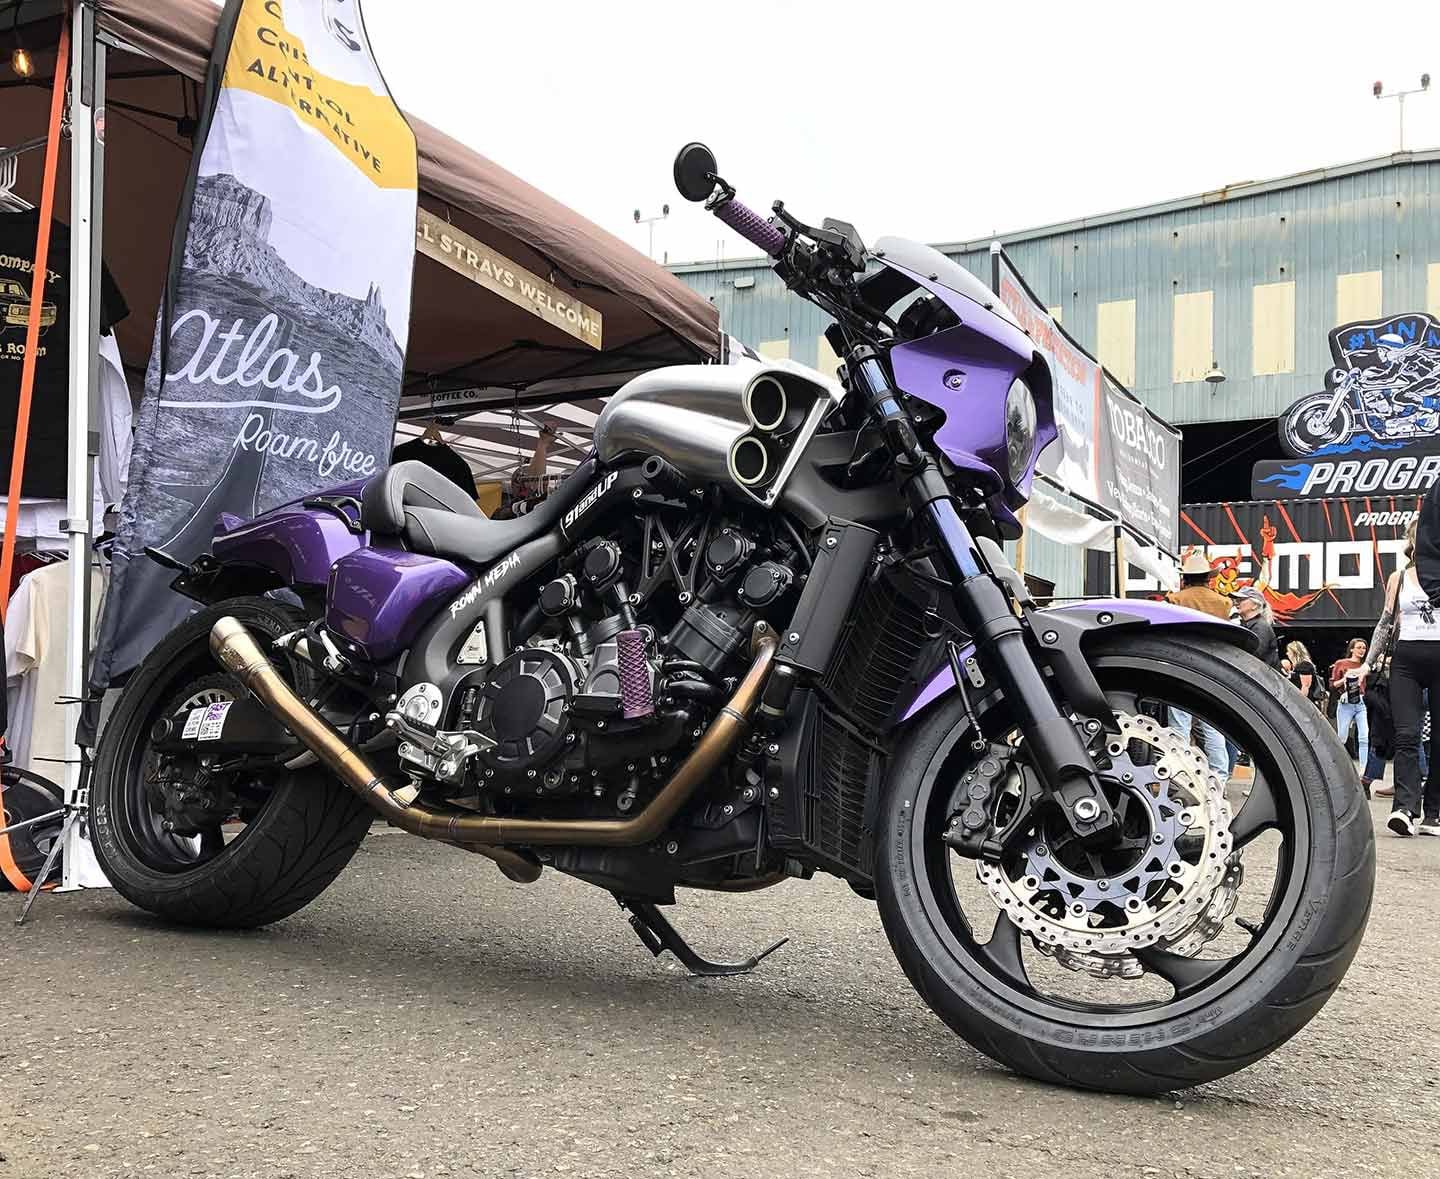 Closing it out with the burly V-Max in all its purple glory.